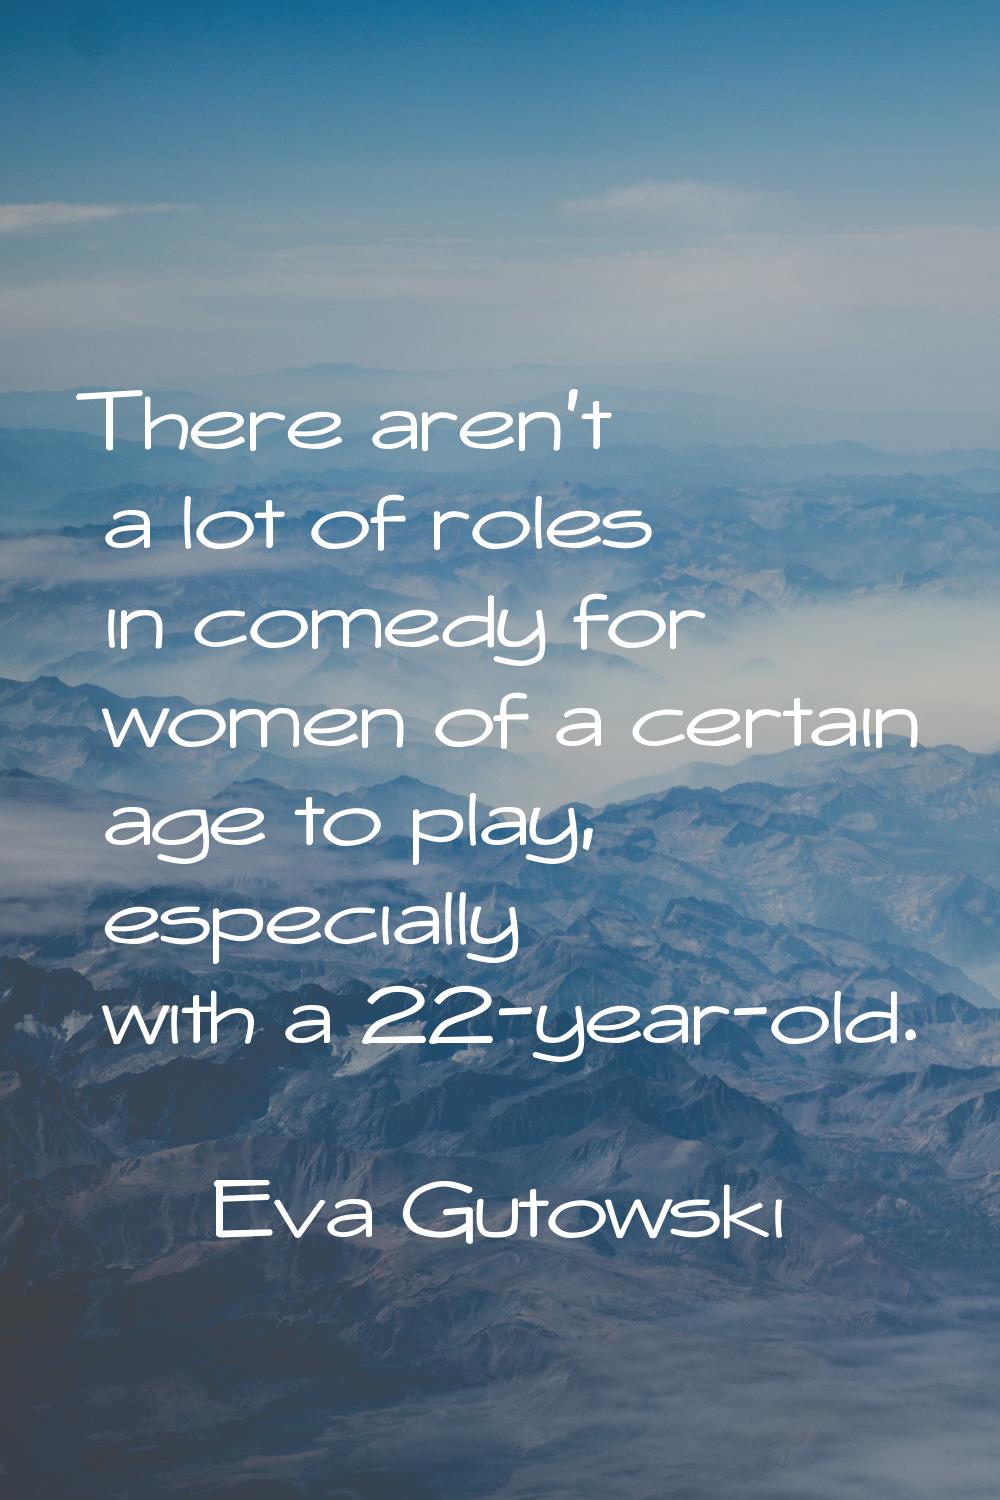 There aren't a lot of roles in comedy for women of a certain age to play, especially with a 22-year